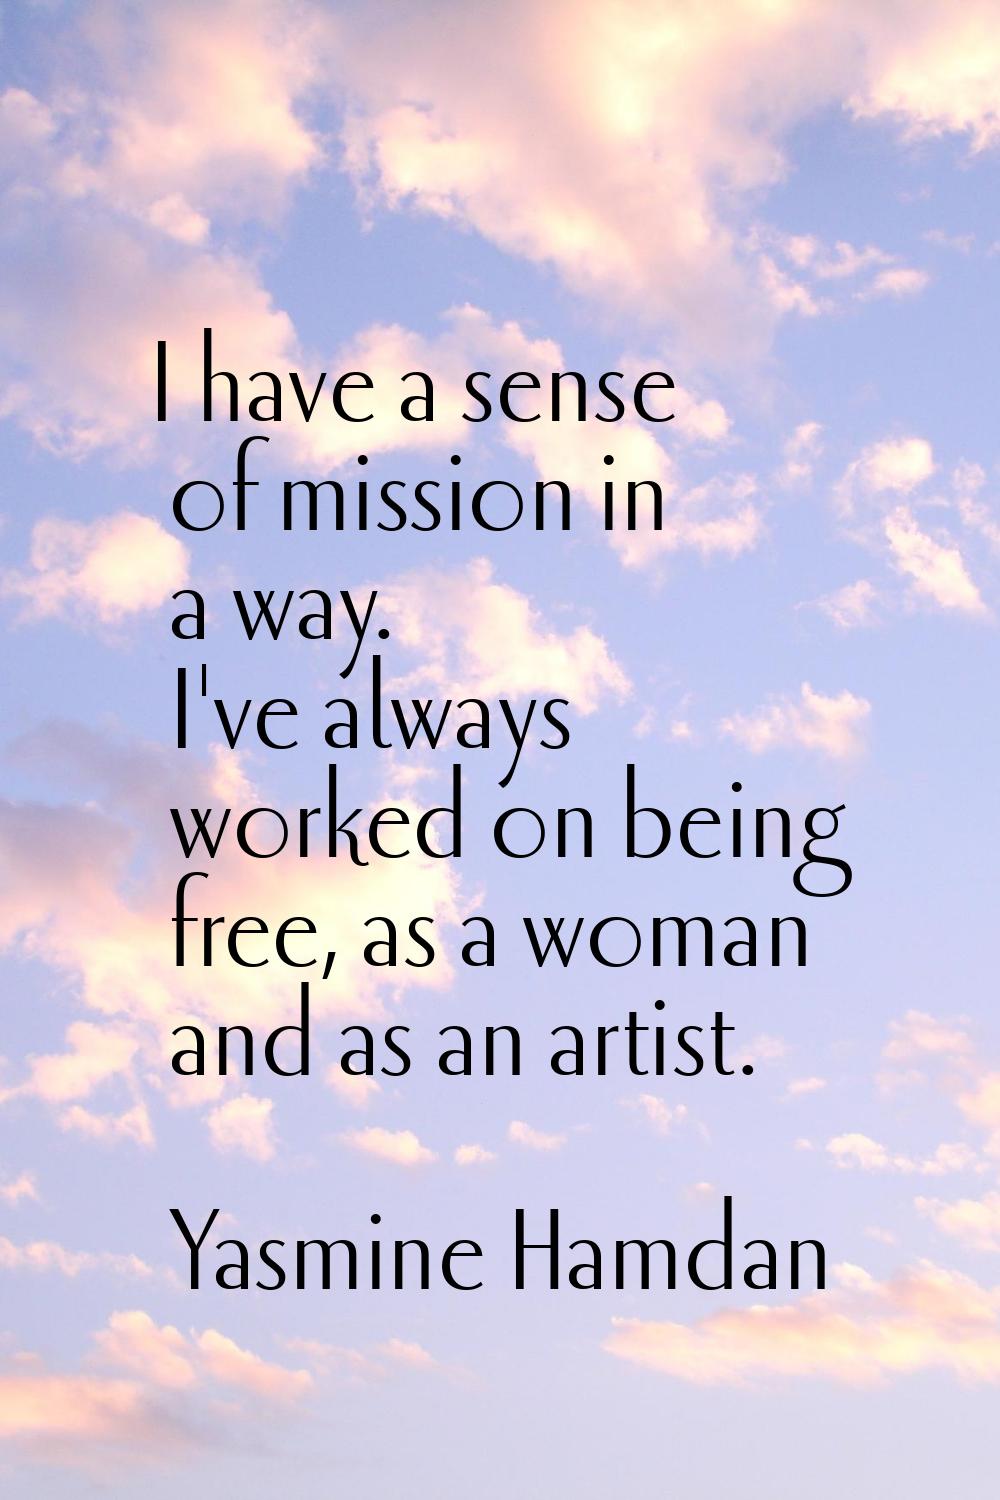 I have a sense of mission in a way. I've always worked on being free, as a woman and as an artist.